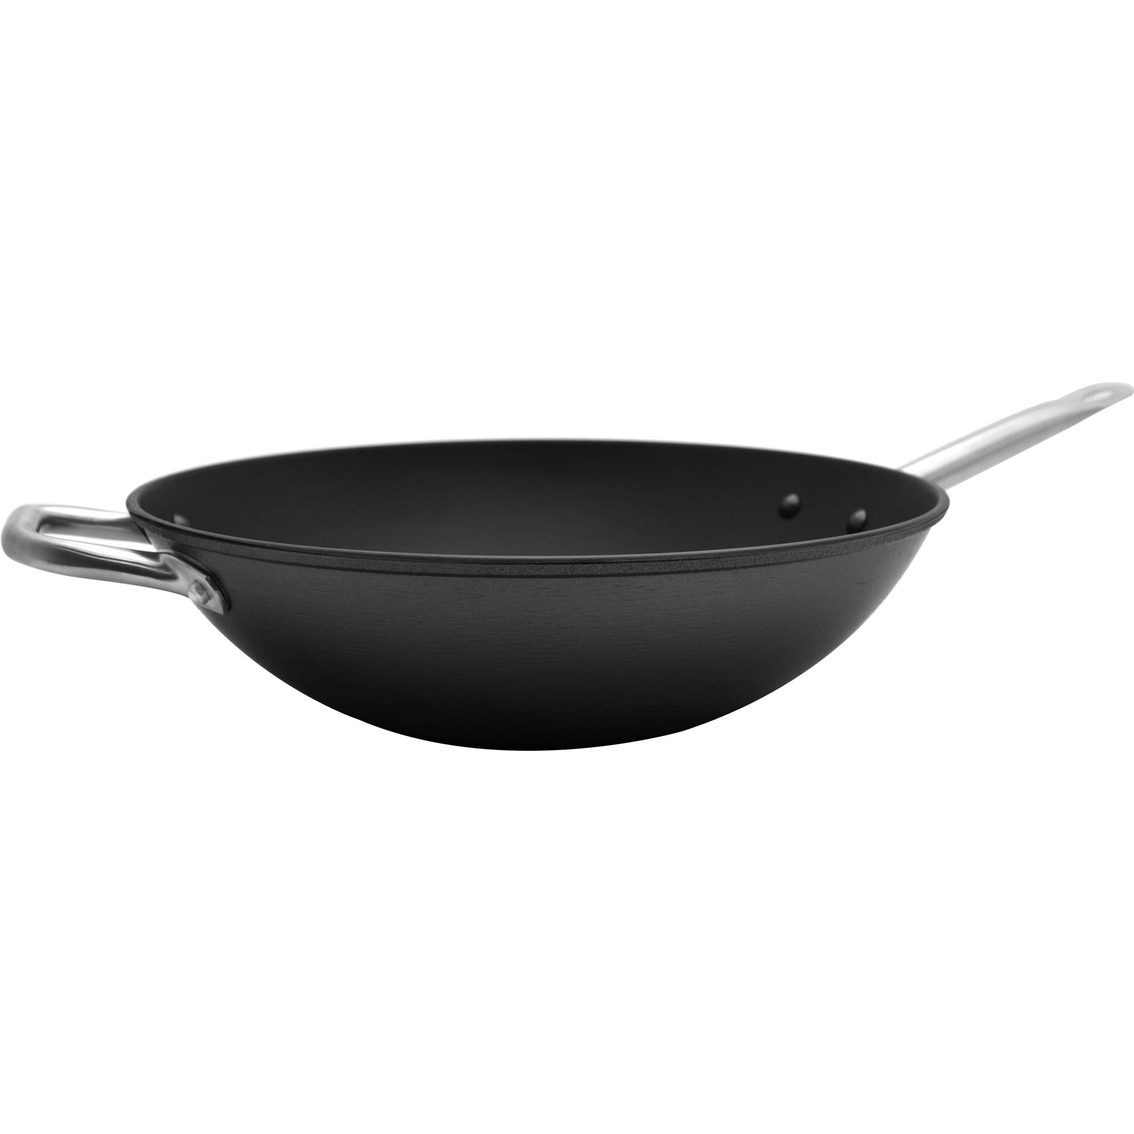 Imusa 14 In. Light Cast Iron Wok With Stainless Steel Handle